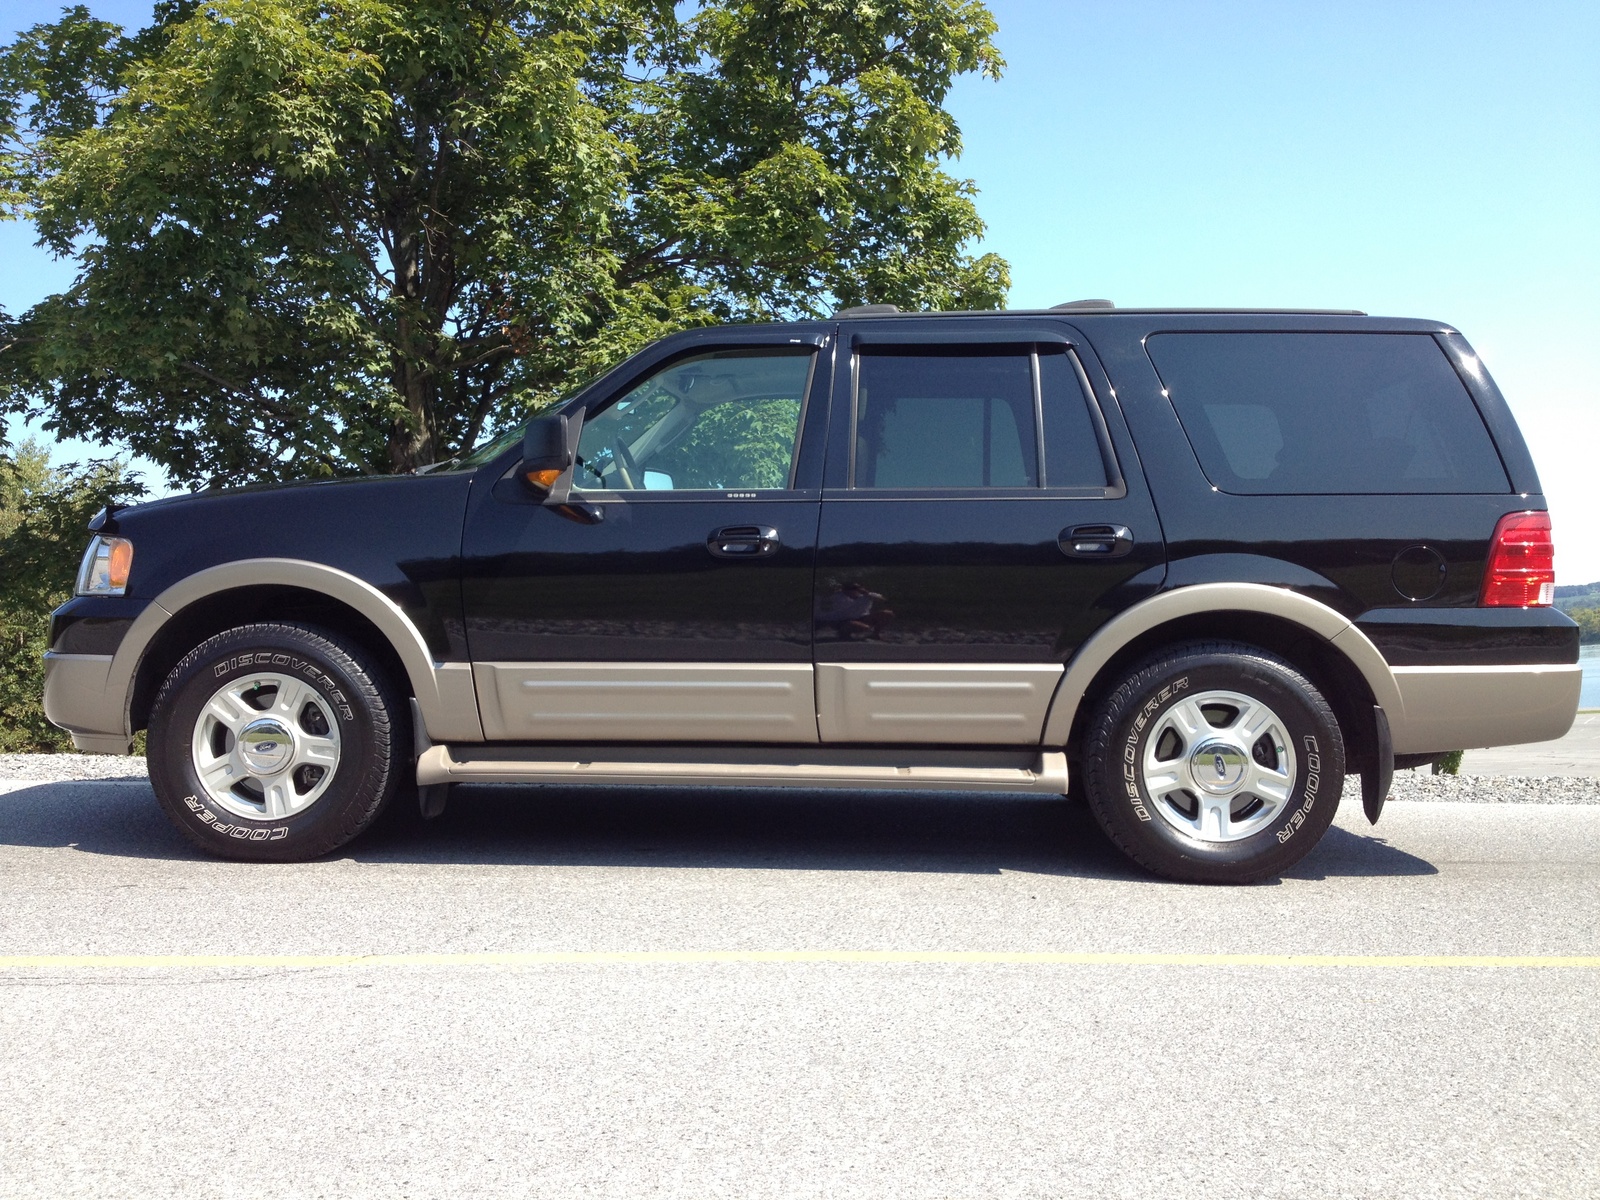 2004 Ford expedition eddie bauer specifications #2